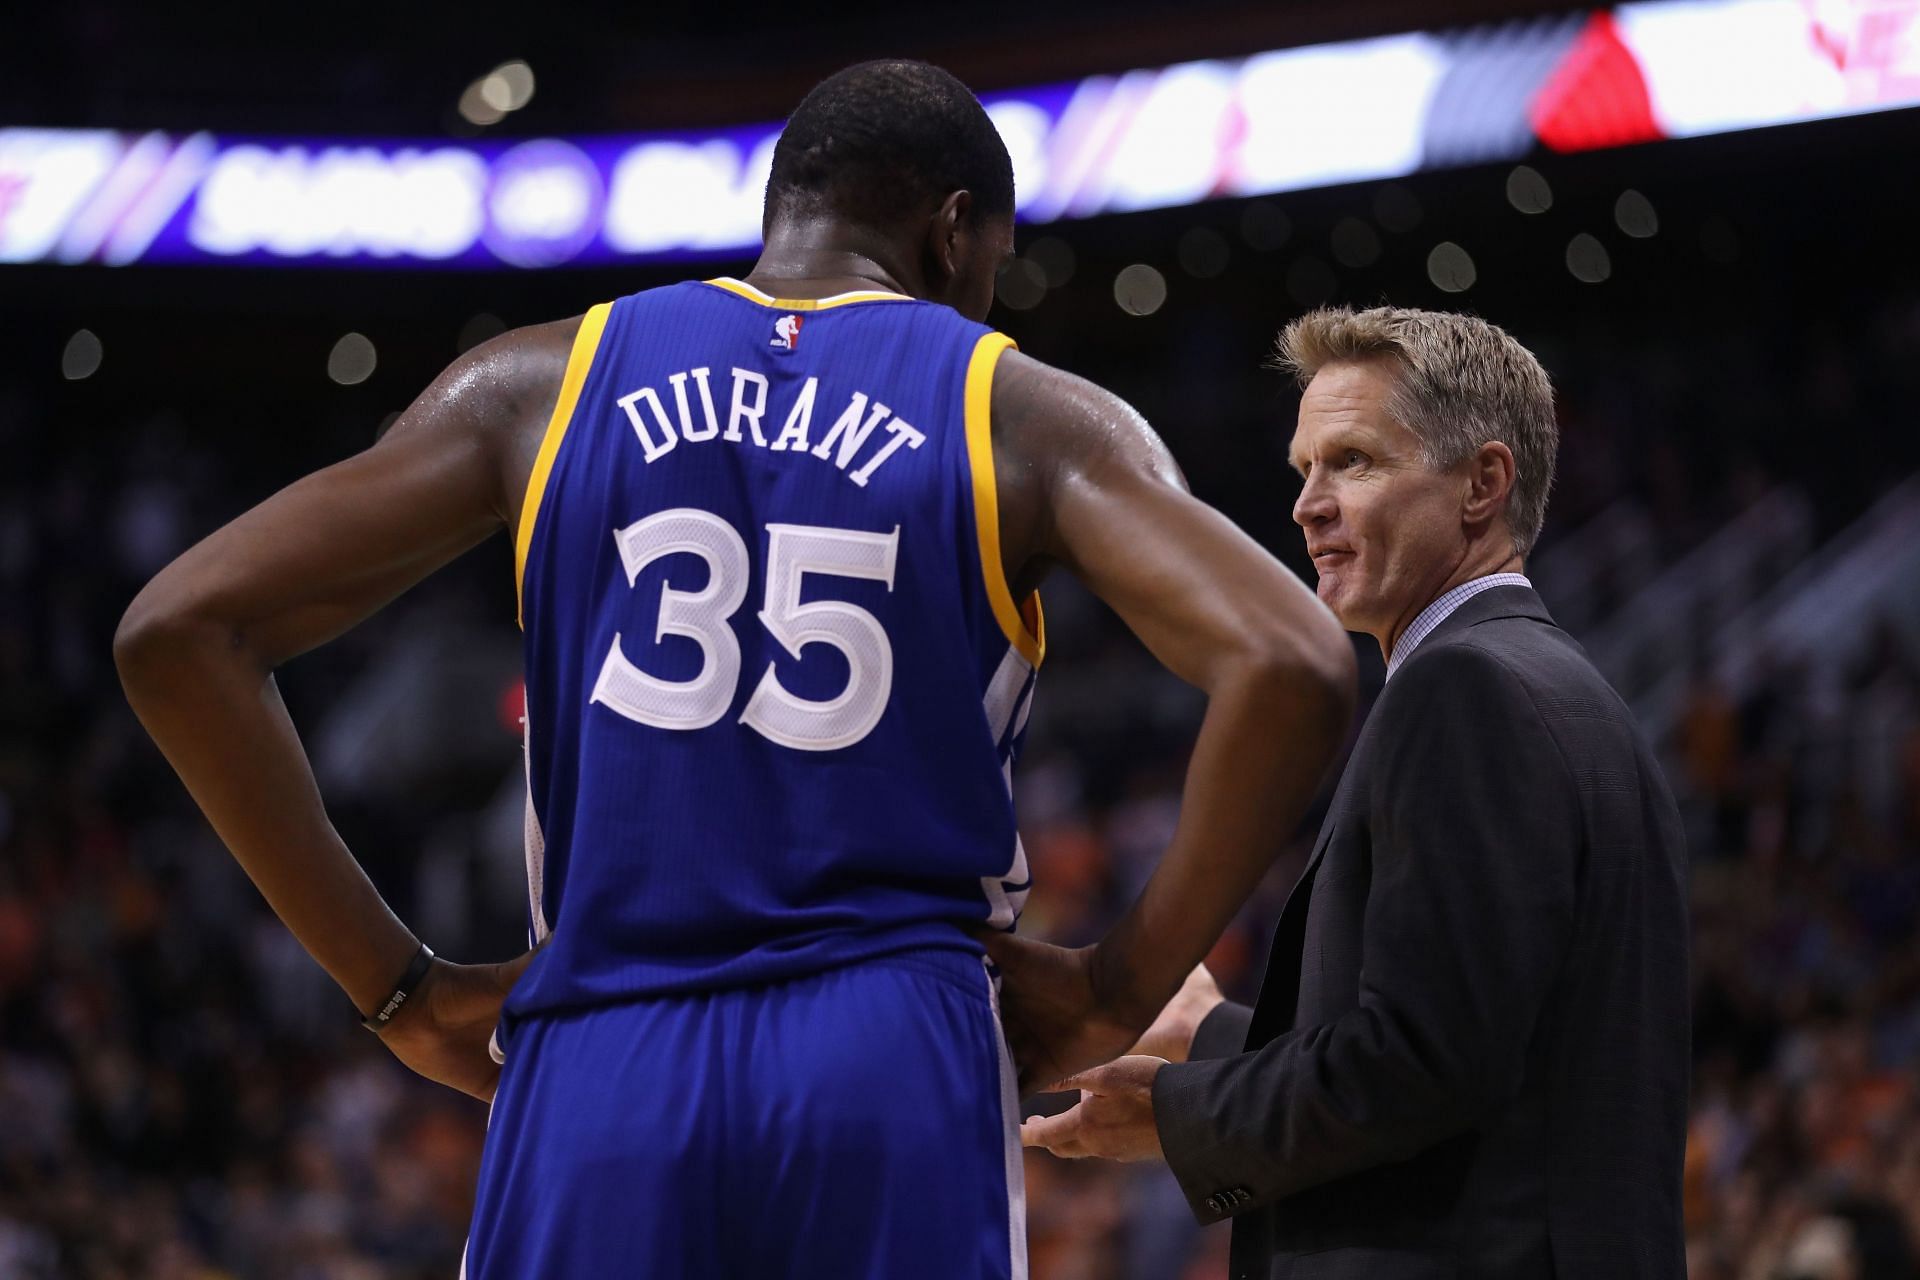 Kevin Durant and Steve Kerr of the Golden State Warriors back in a game in 2016.